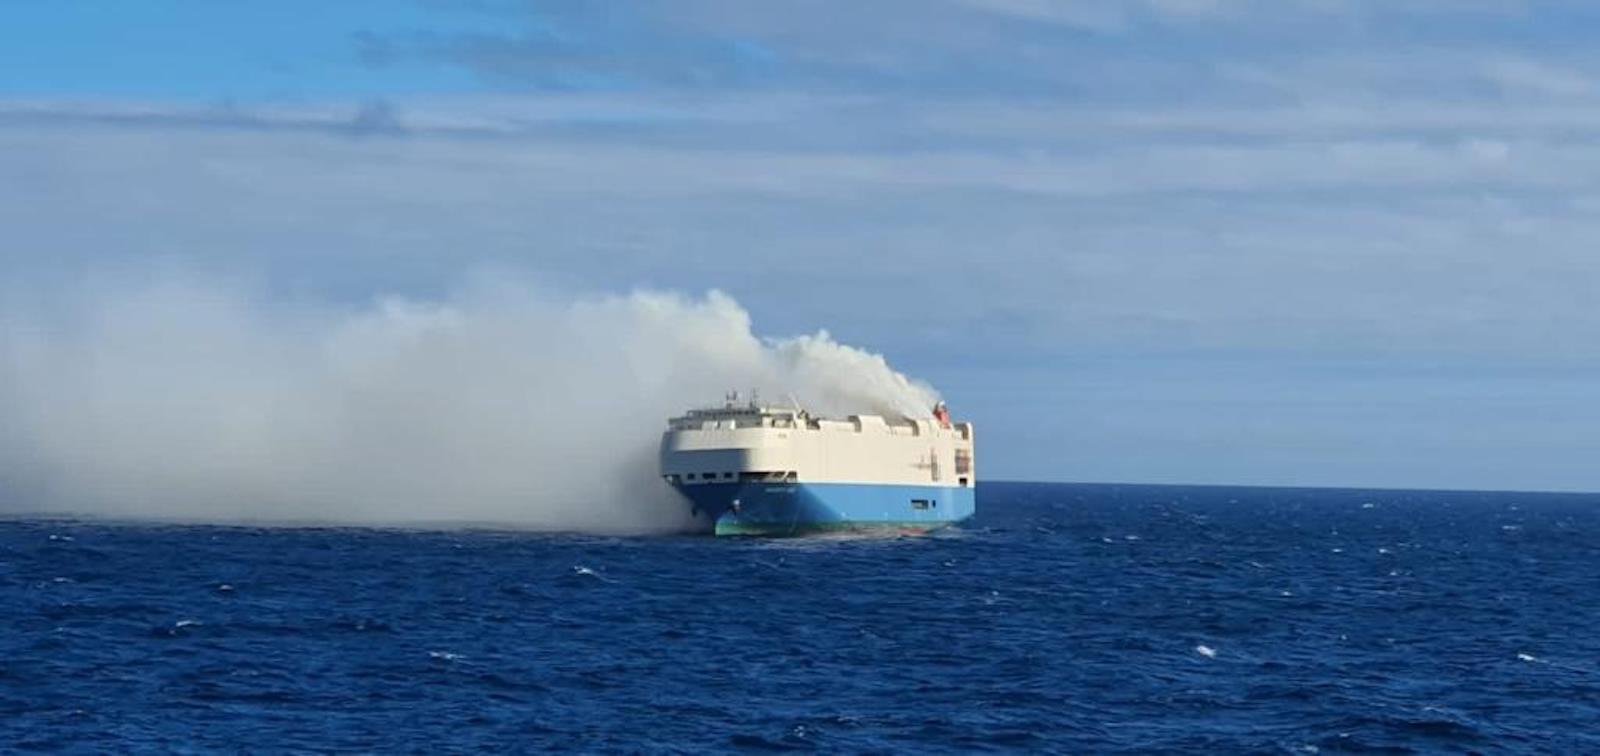 Car Carrier Felicity Ace Abandoned After Catching Fire in Atlantic Ocean